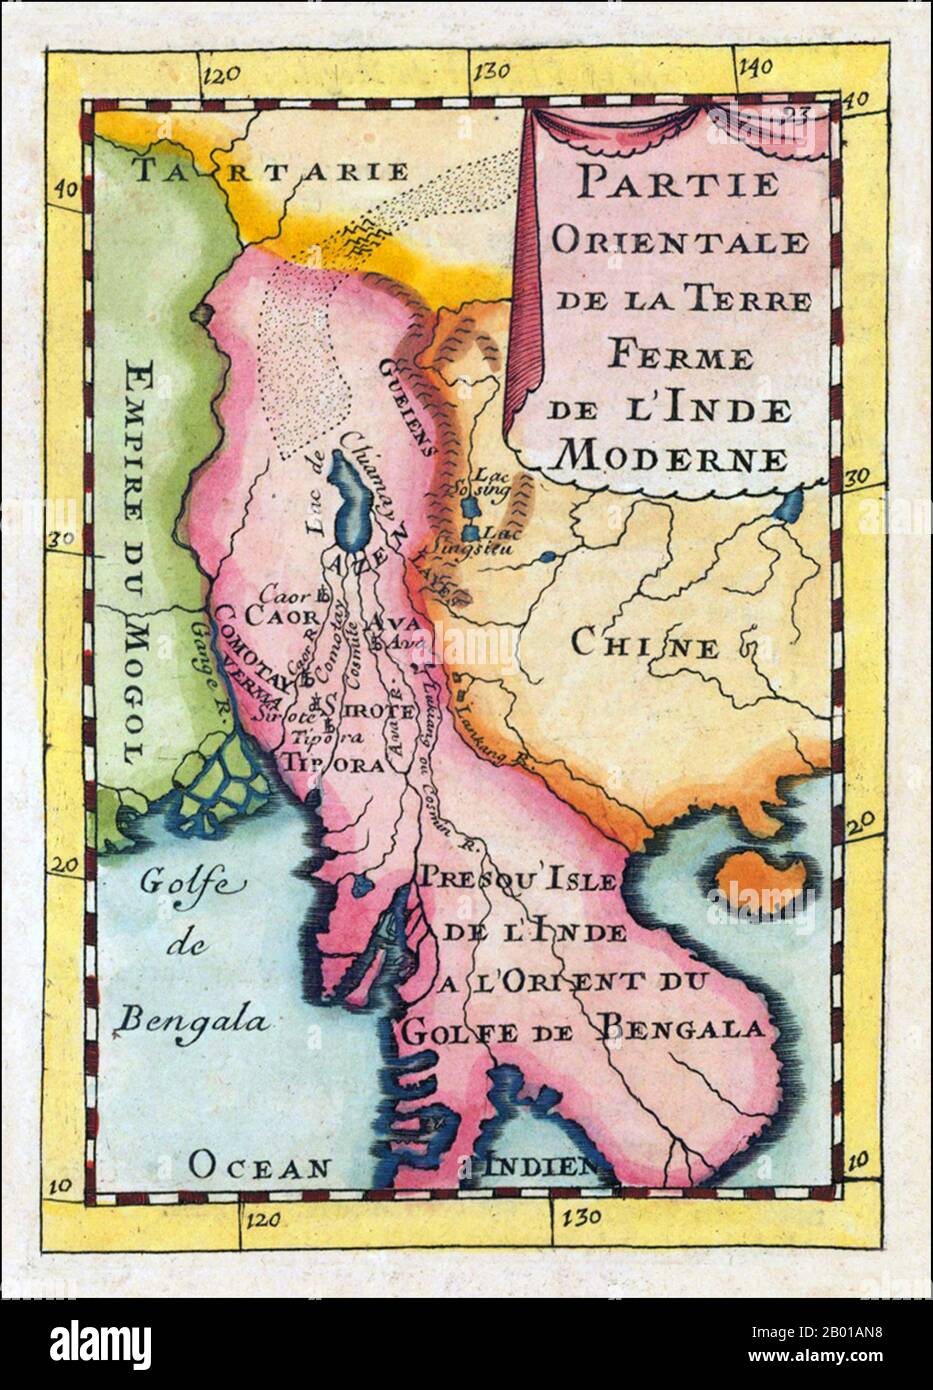 Asia: 'Partie Orientale De La Terre Ferme De L' Inde Moderne'. Map of Indochina showing parts of India, China and Central Asia and featuring prominently the mythical 'Lake Chiamay', by Alain Manesson Mallet (1630-1706), Paris, 1683.  Copper engraving, hand colored in wash and outline. Decorative engraved map showing the gulf of Bengal with Burma and Thailand and neighbouring countries. With several engraved names of rivers and regions, including the mythical 'Lake Chiamay' or 'Lake Chiang Mai', supposed source for many of the great rivers of Southeast Asia. Stock Photo